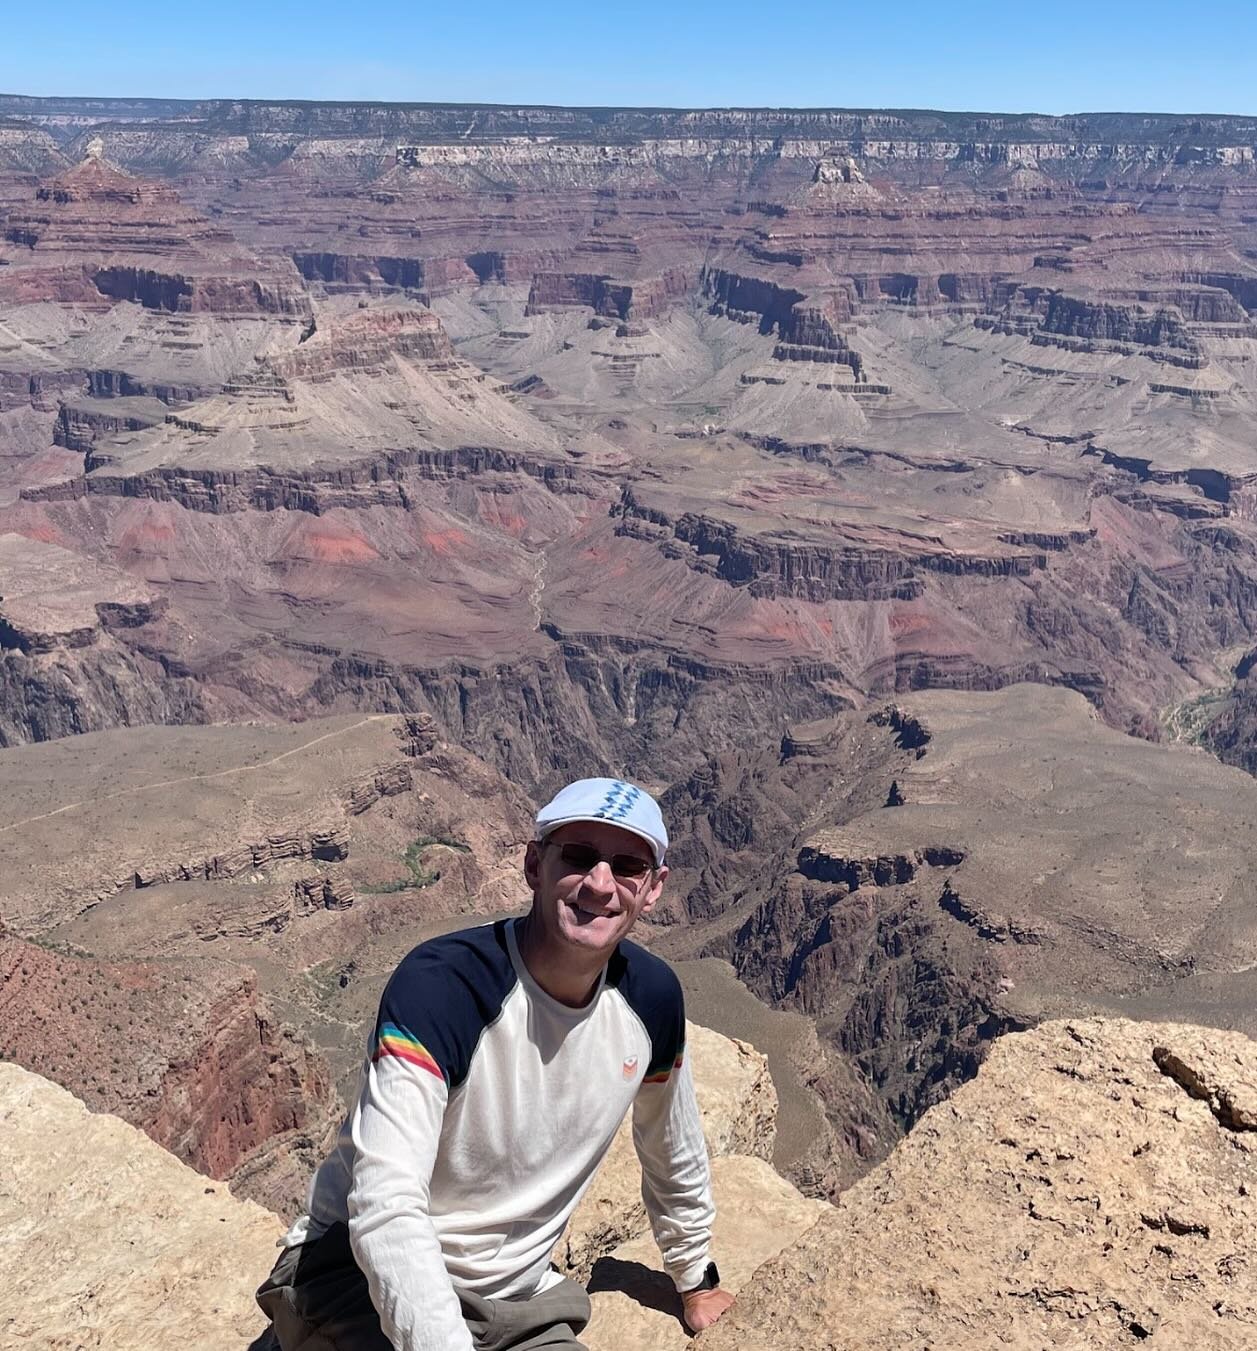 Throwback to last summer&rsquo;s visit to the Grand Canyon (and the dizzying views)!